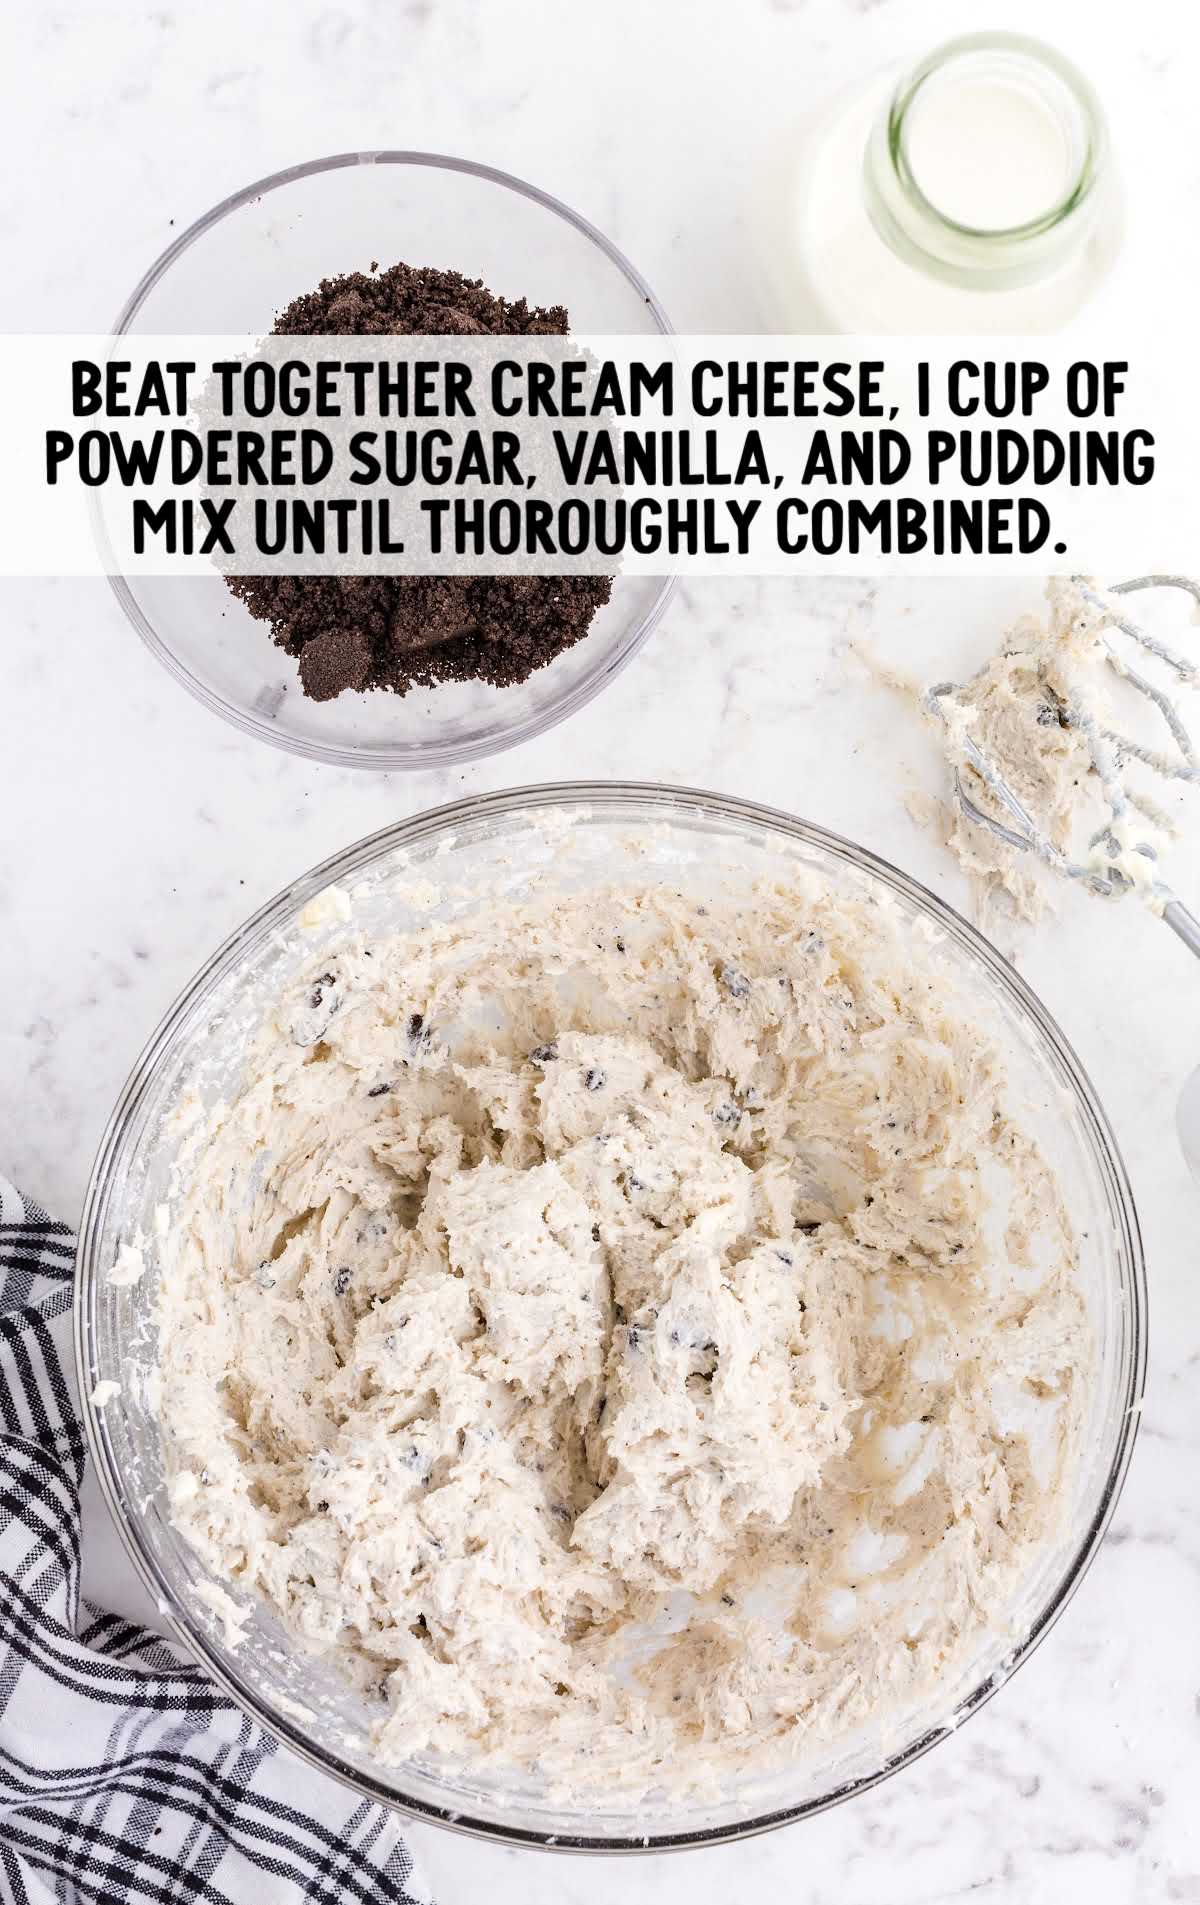 cream cheese, powered sugar, vanilla mixed together in a bowl